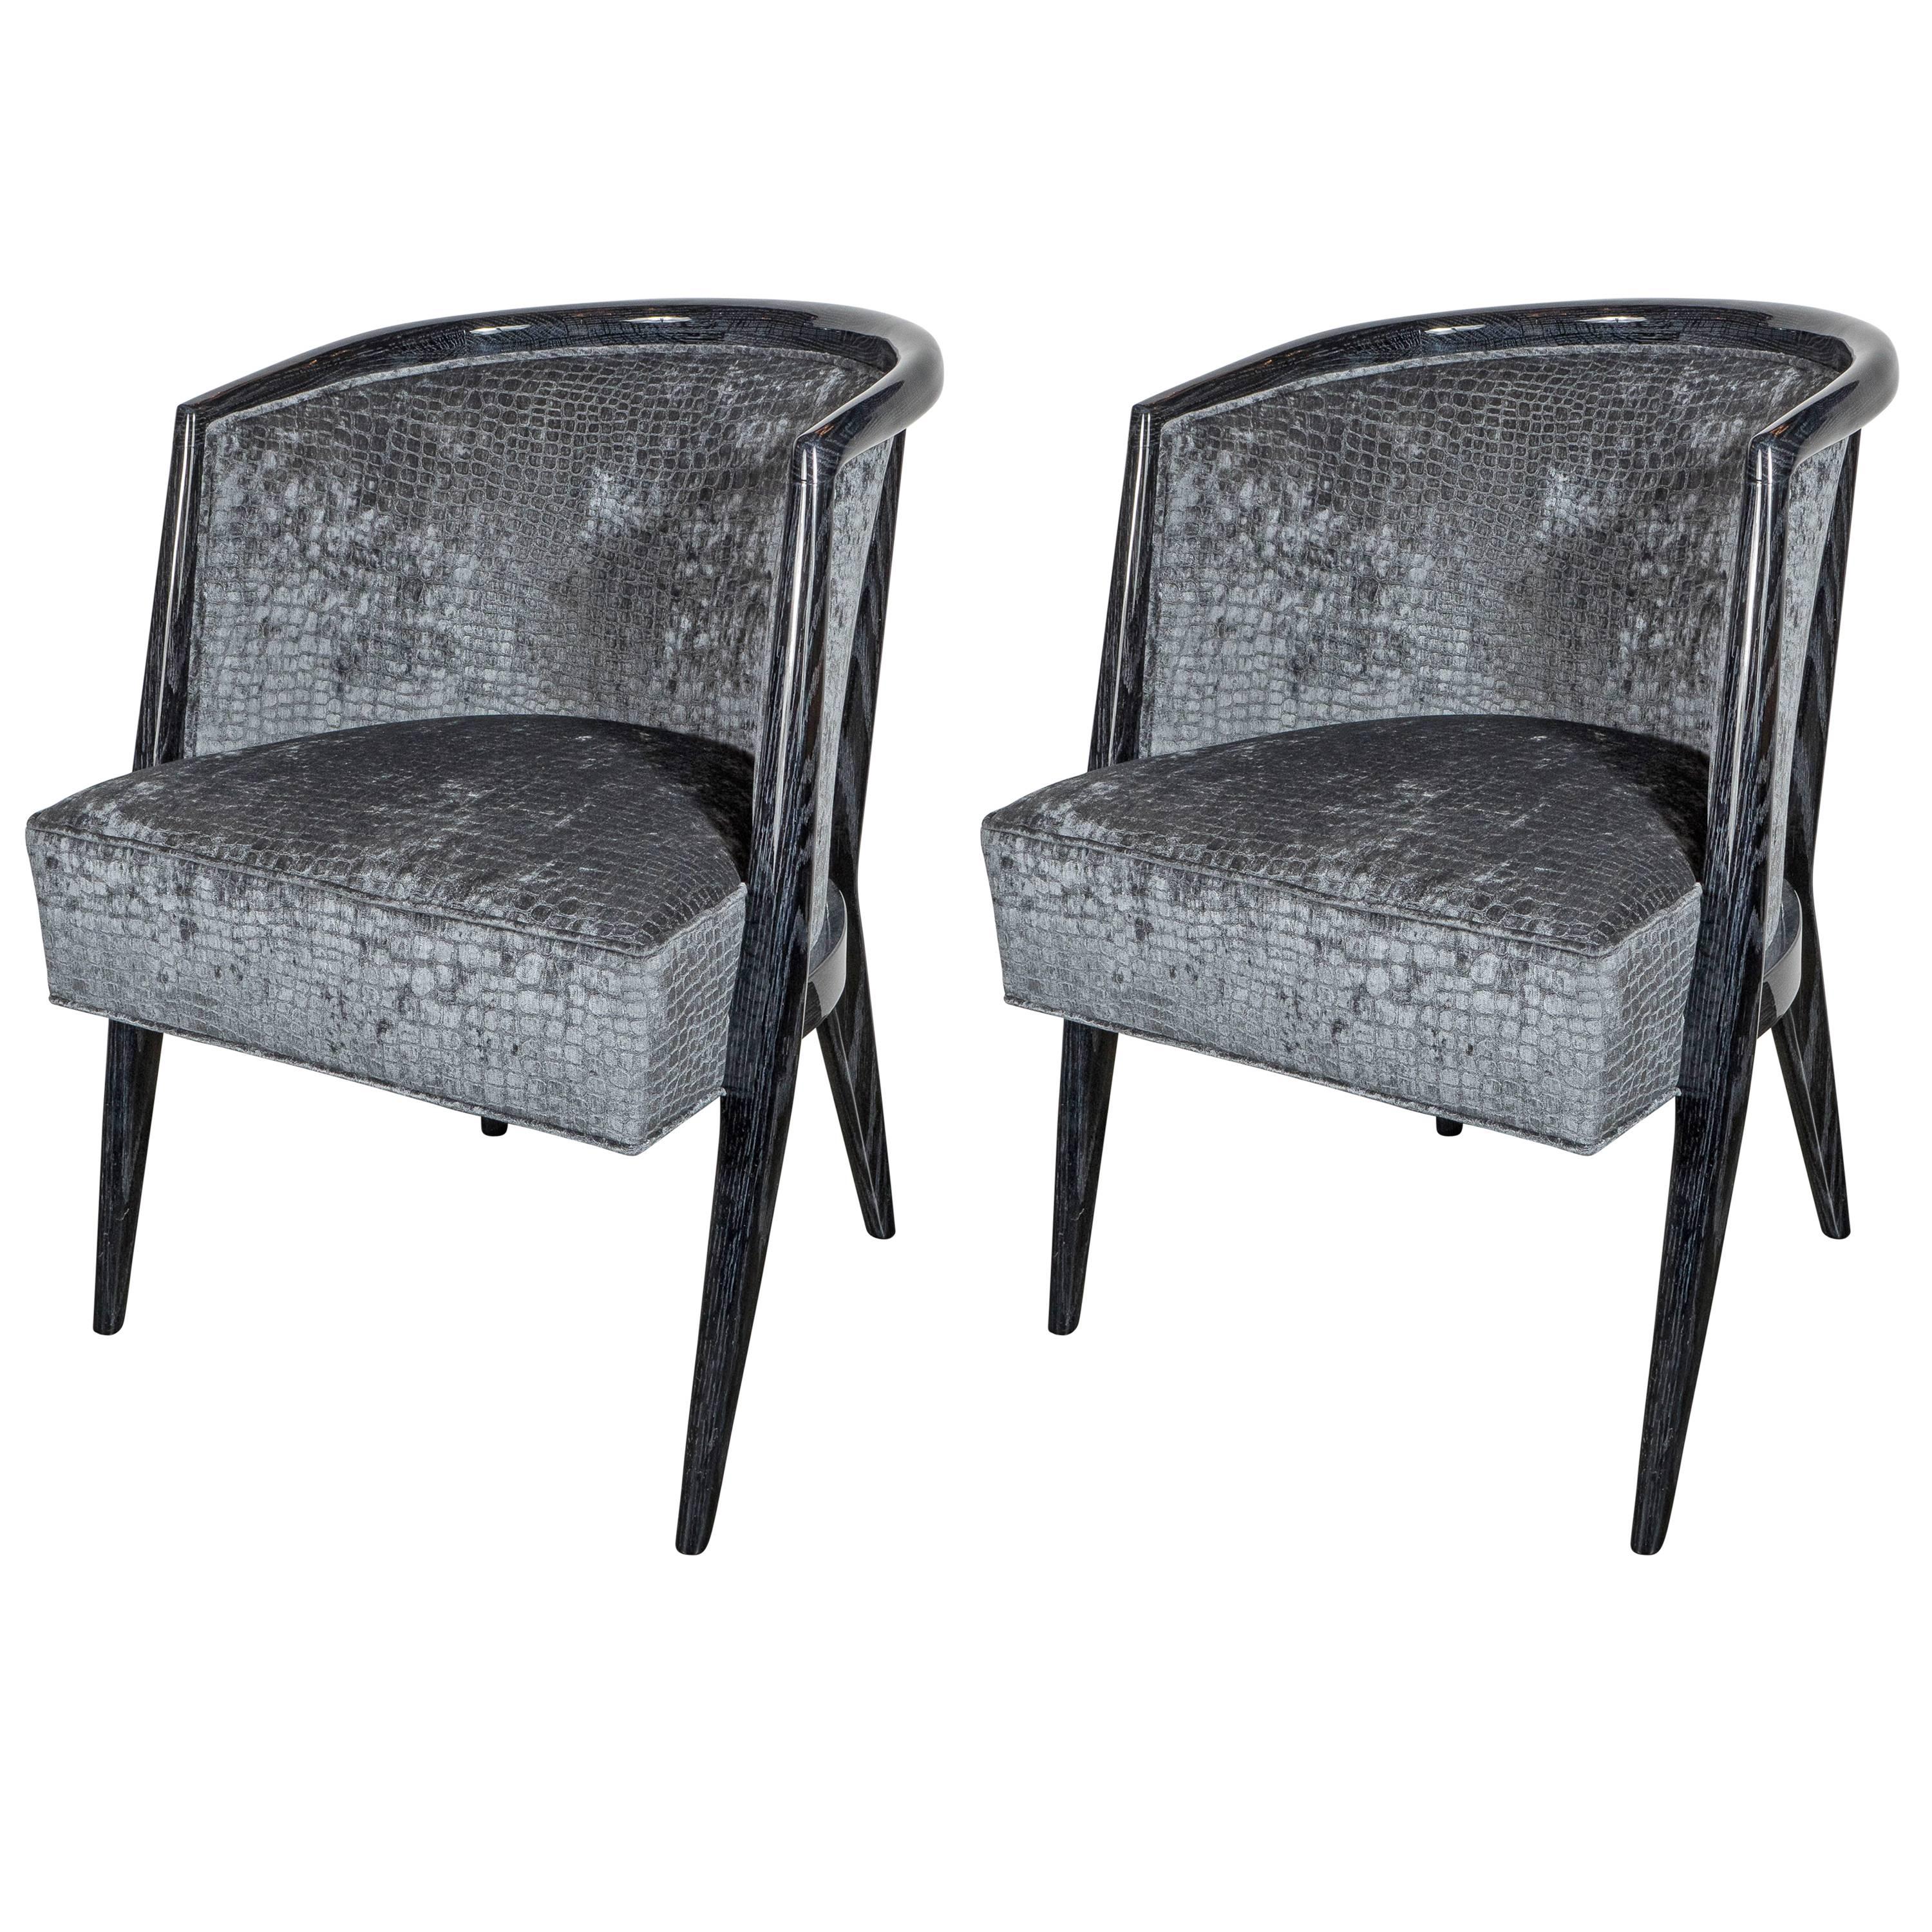 Chic Pair of Mid-Century Silver Cerused Chairs in the Manner of Harvey Probber